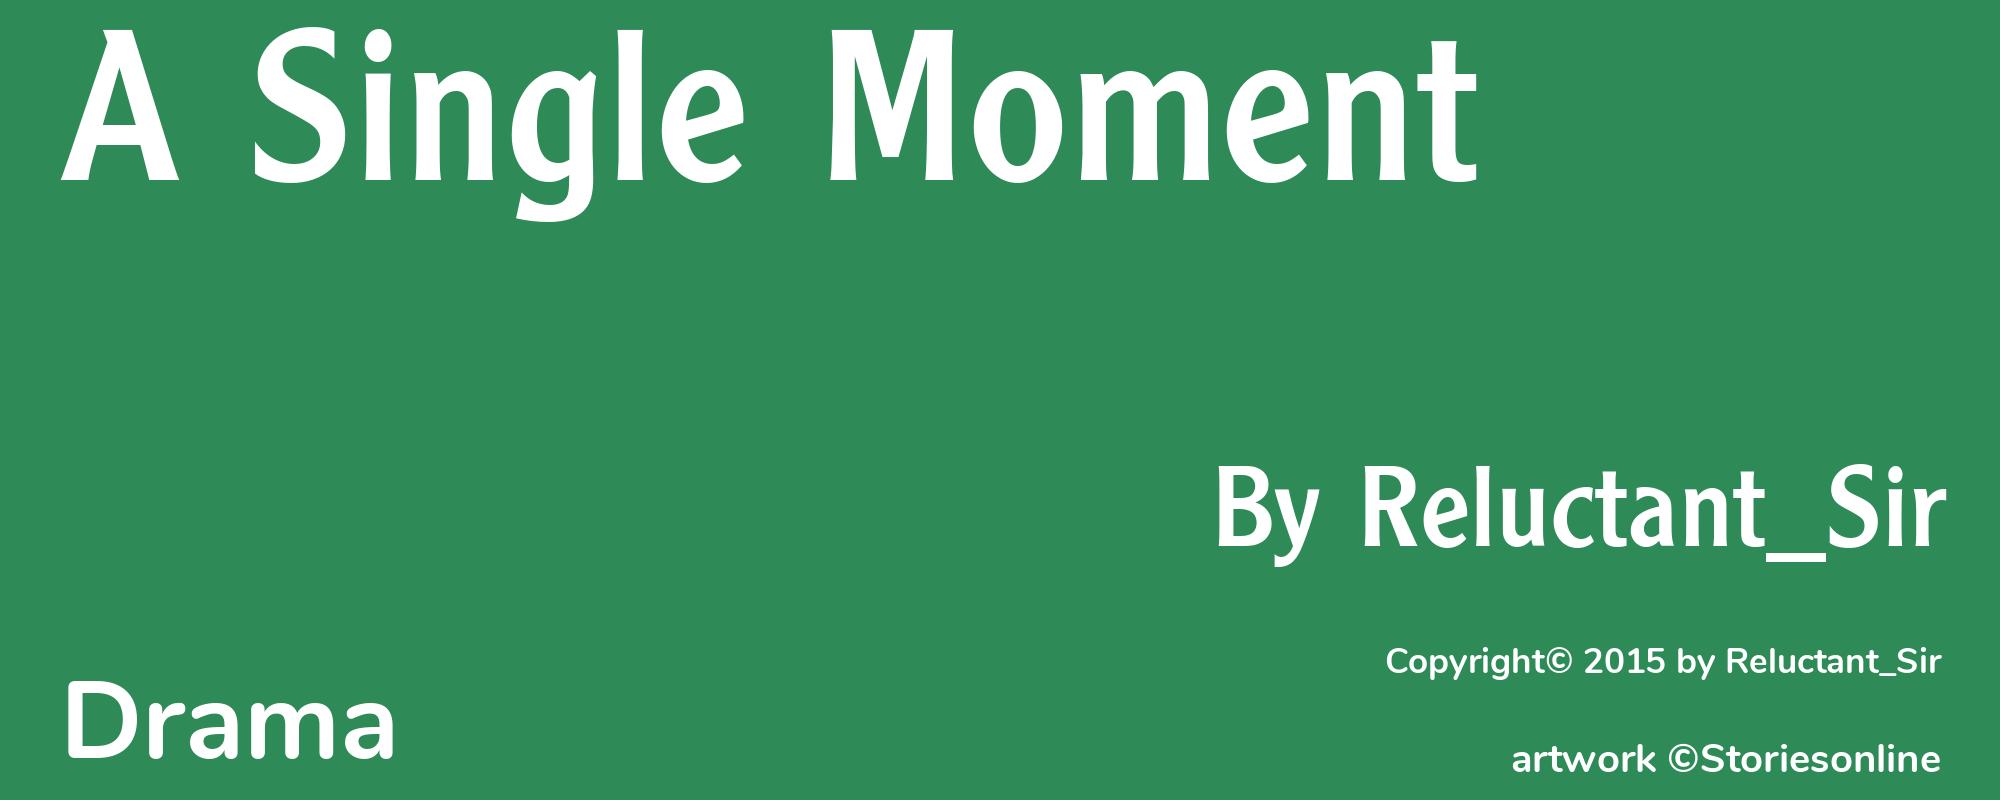 A Single Moment - Cover